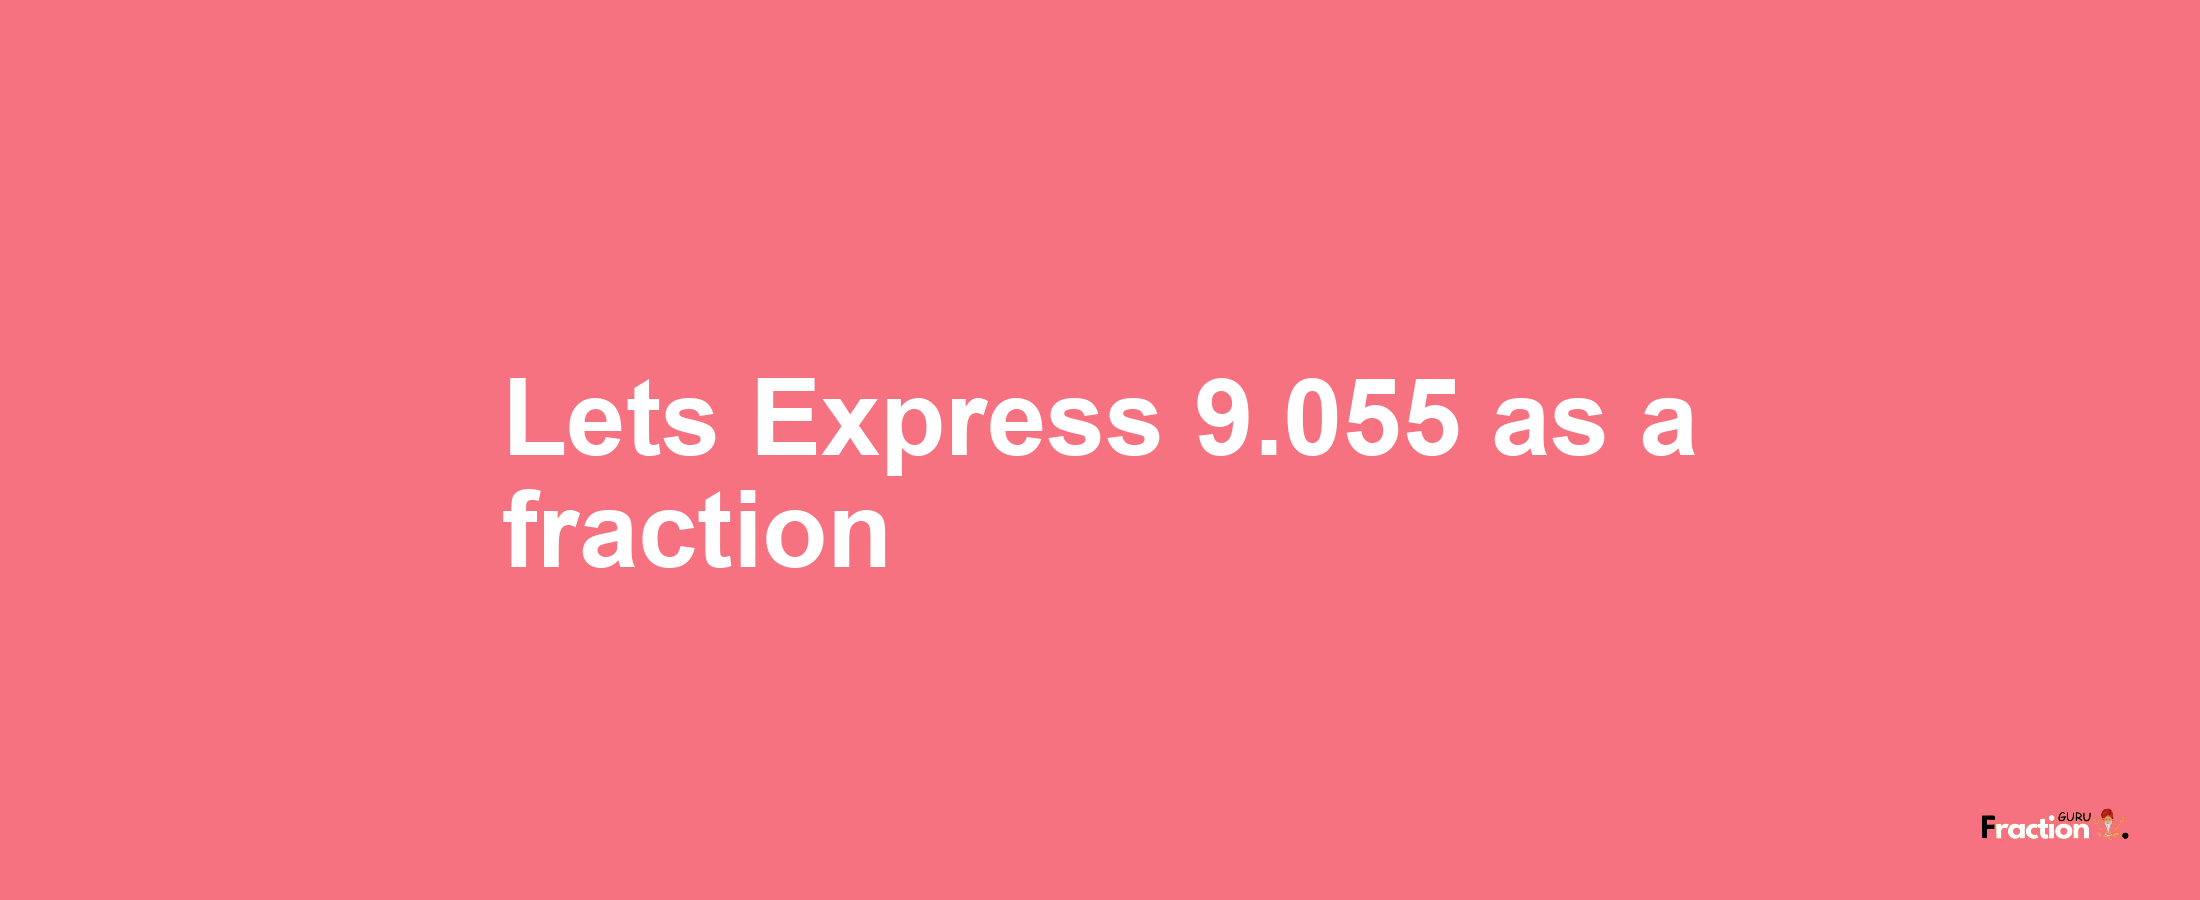 Lets Express 9.055 as afraction